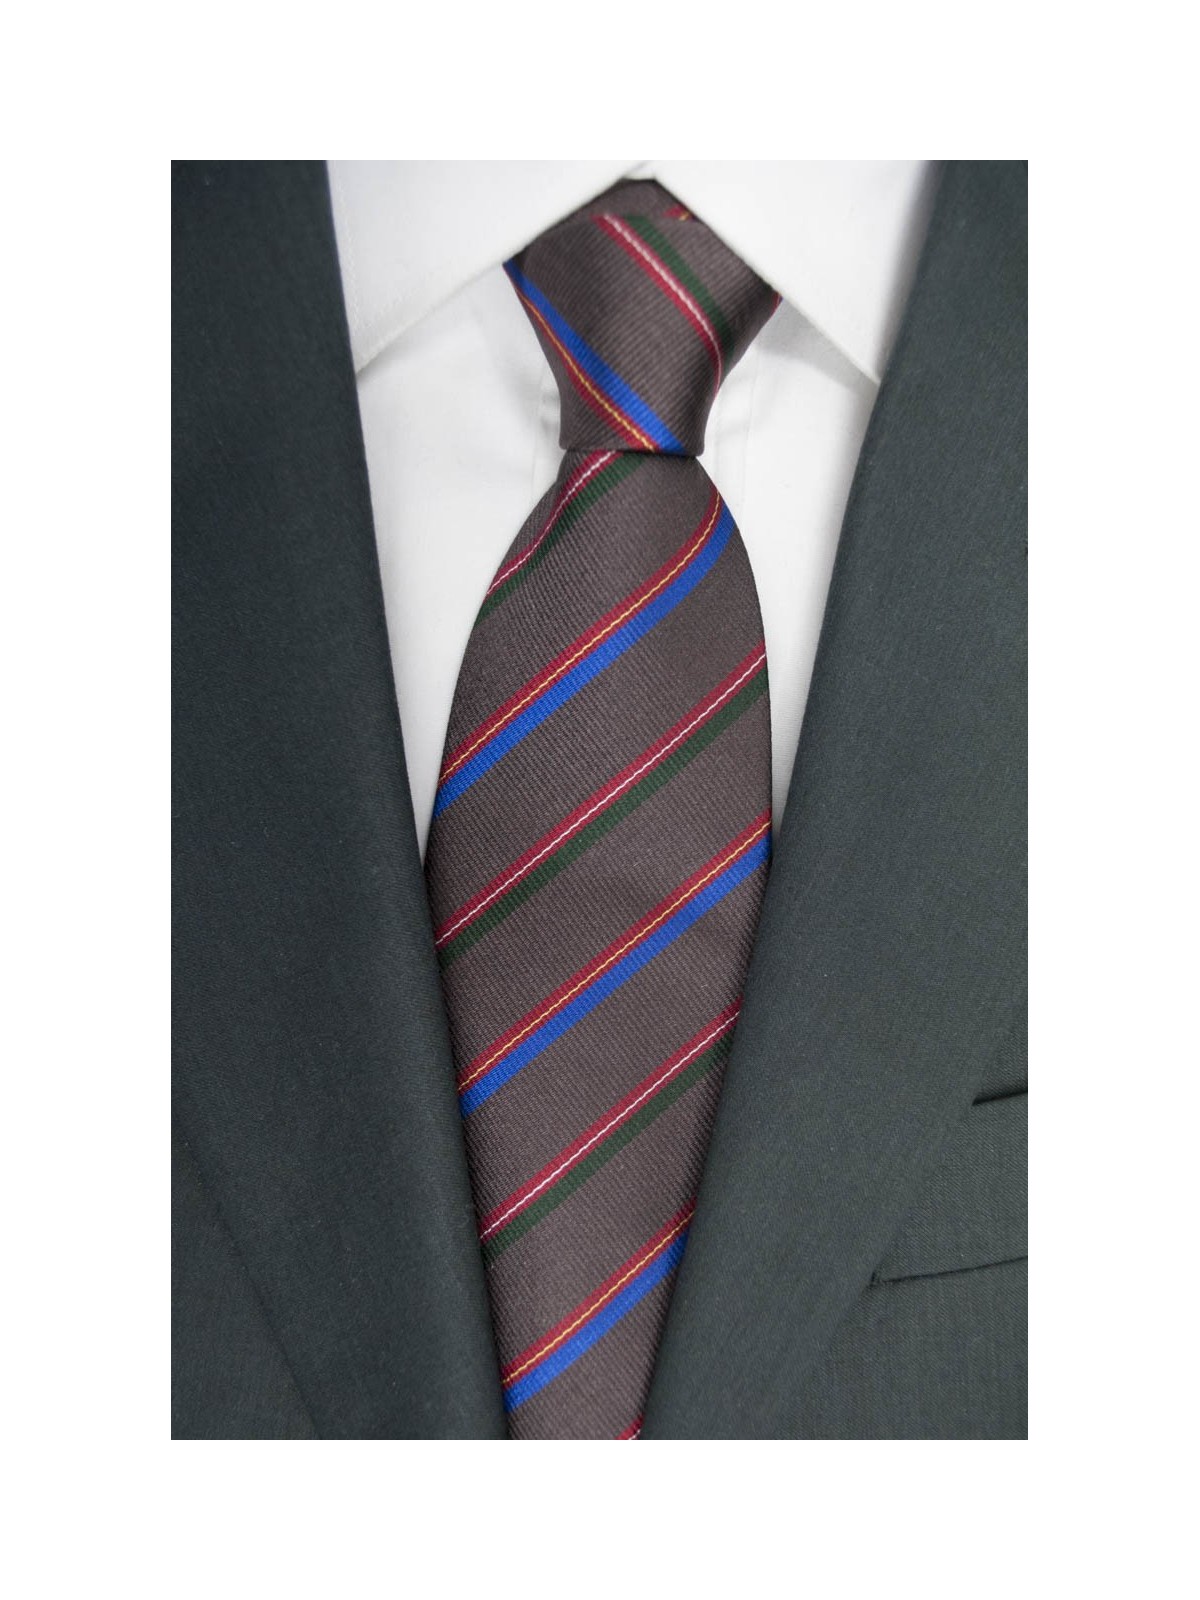 Tie Marrine Regimental Red Green Blue - 100% Pure Silk - Made in Italy